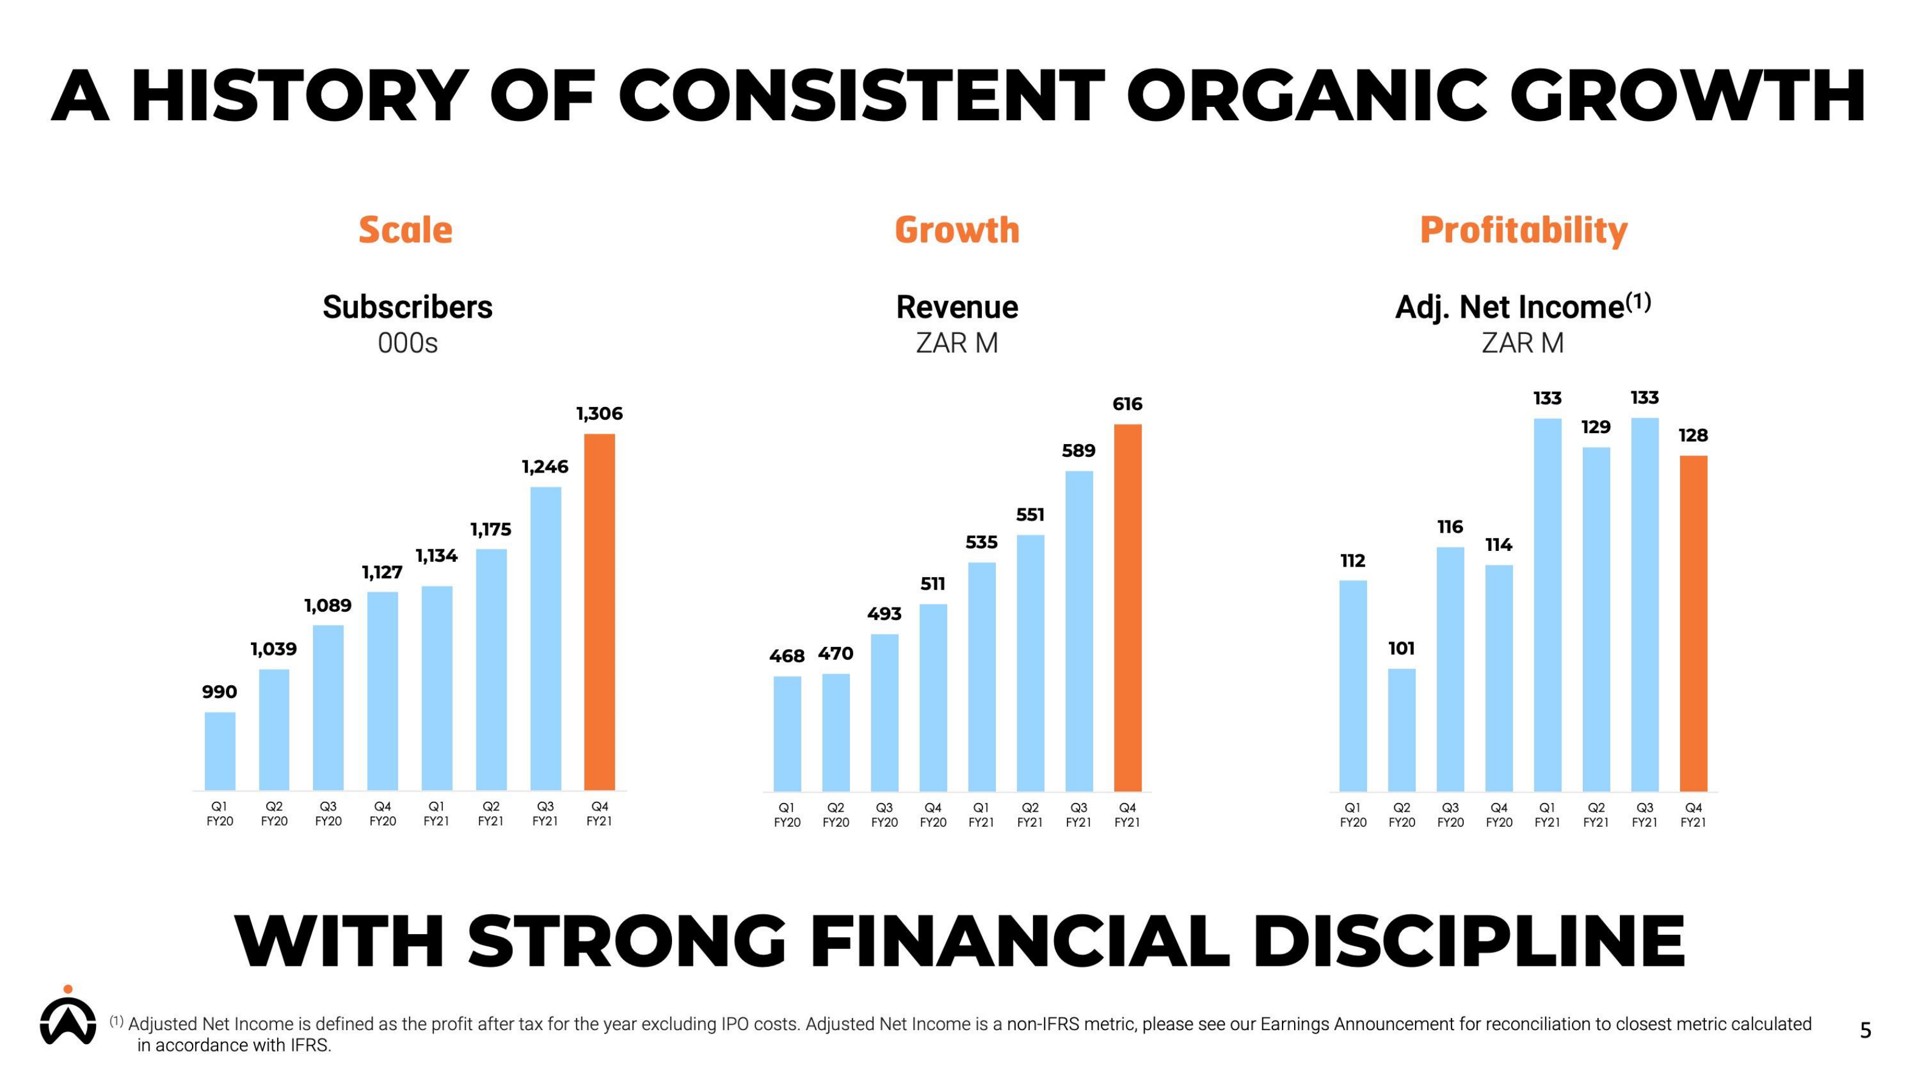 a history of consistent organic growth with strong financial discipline | Karooooo